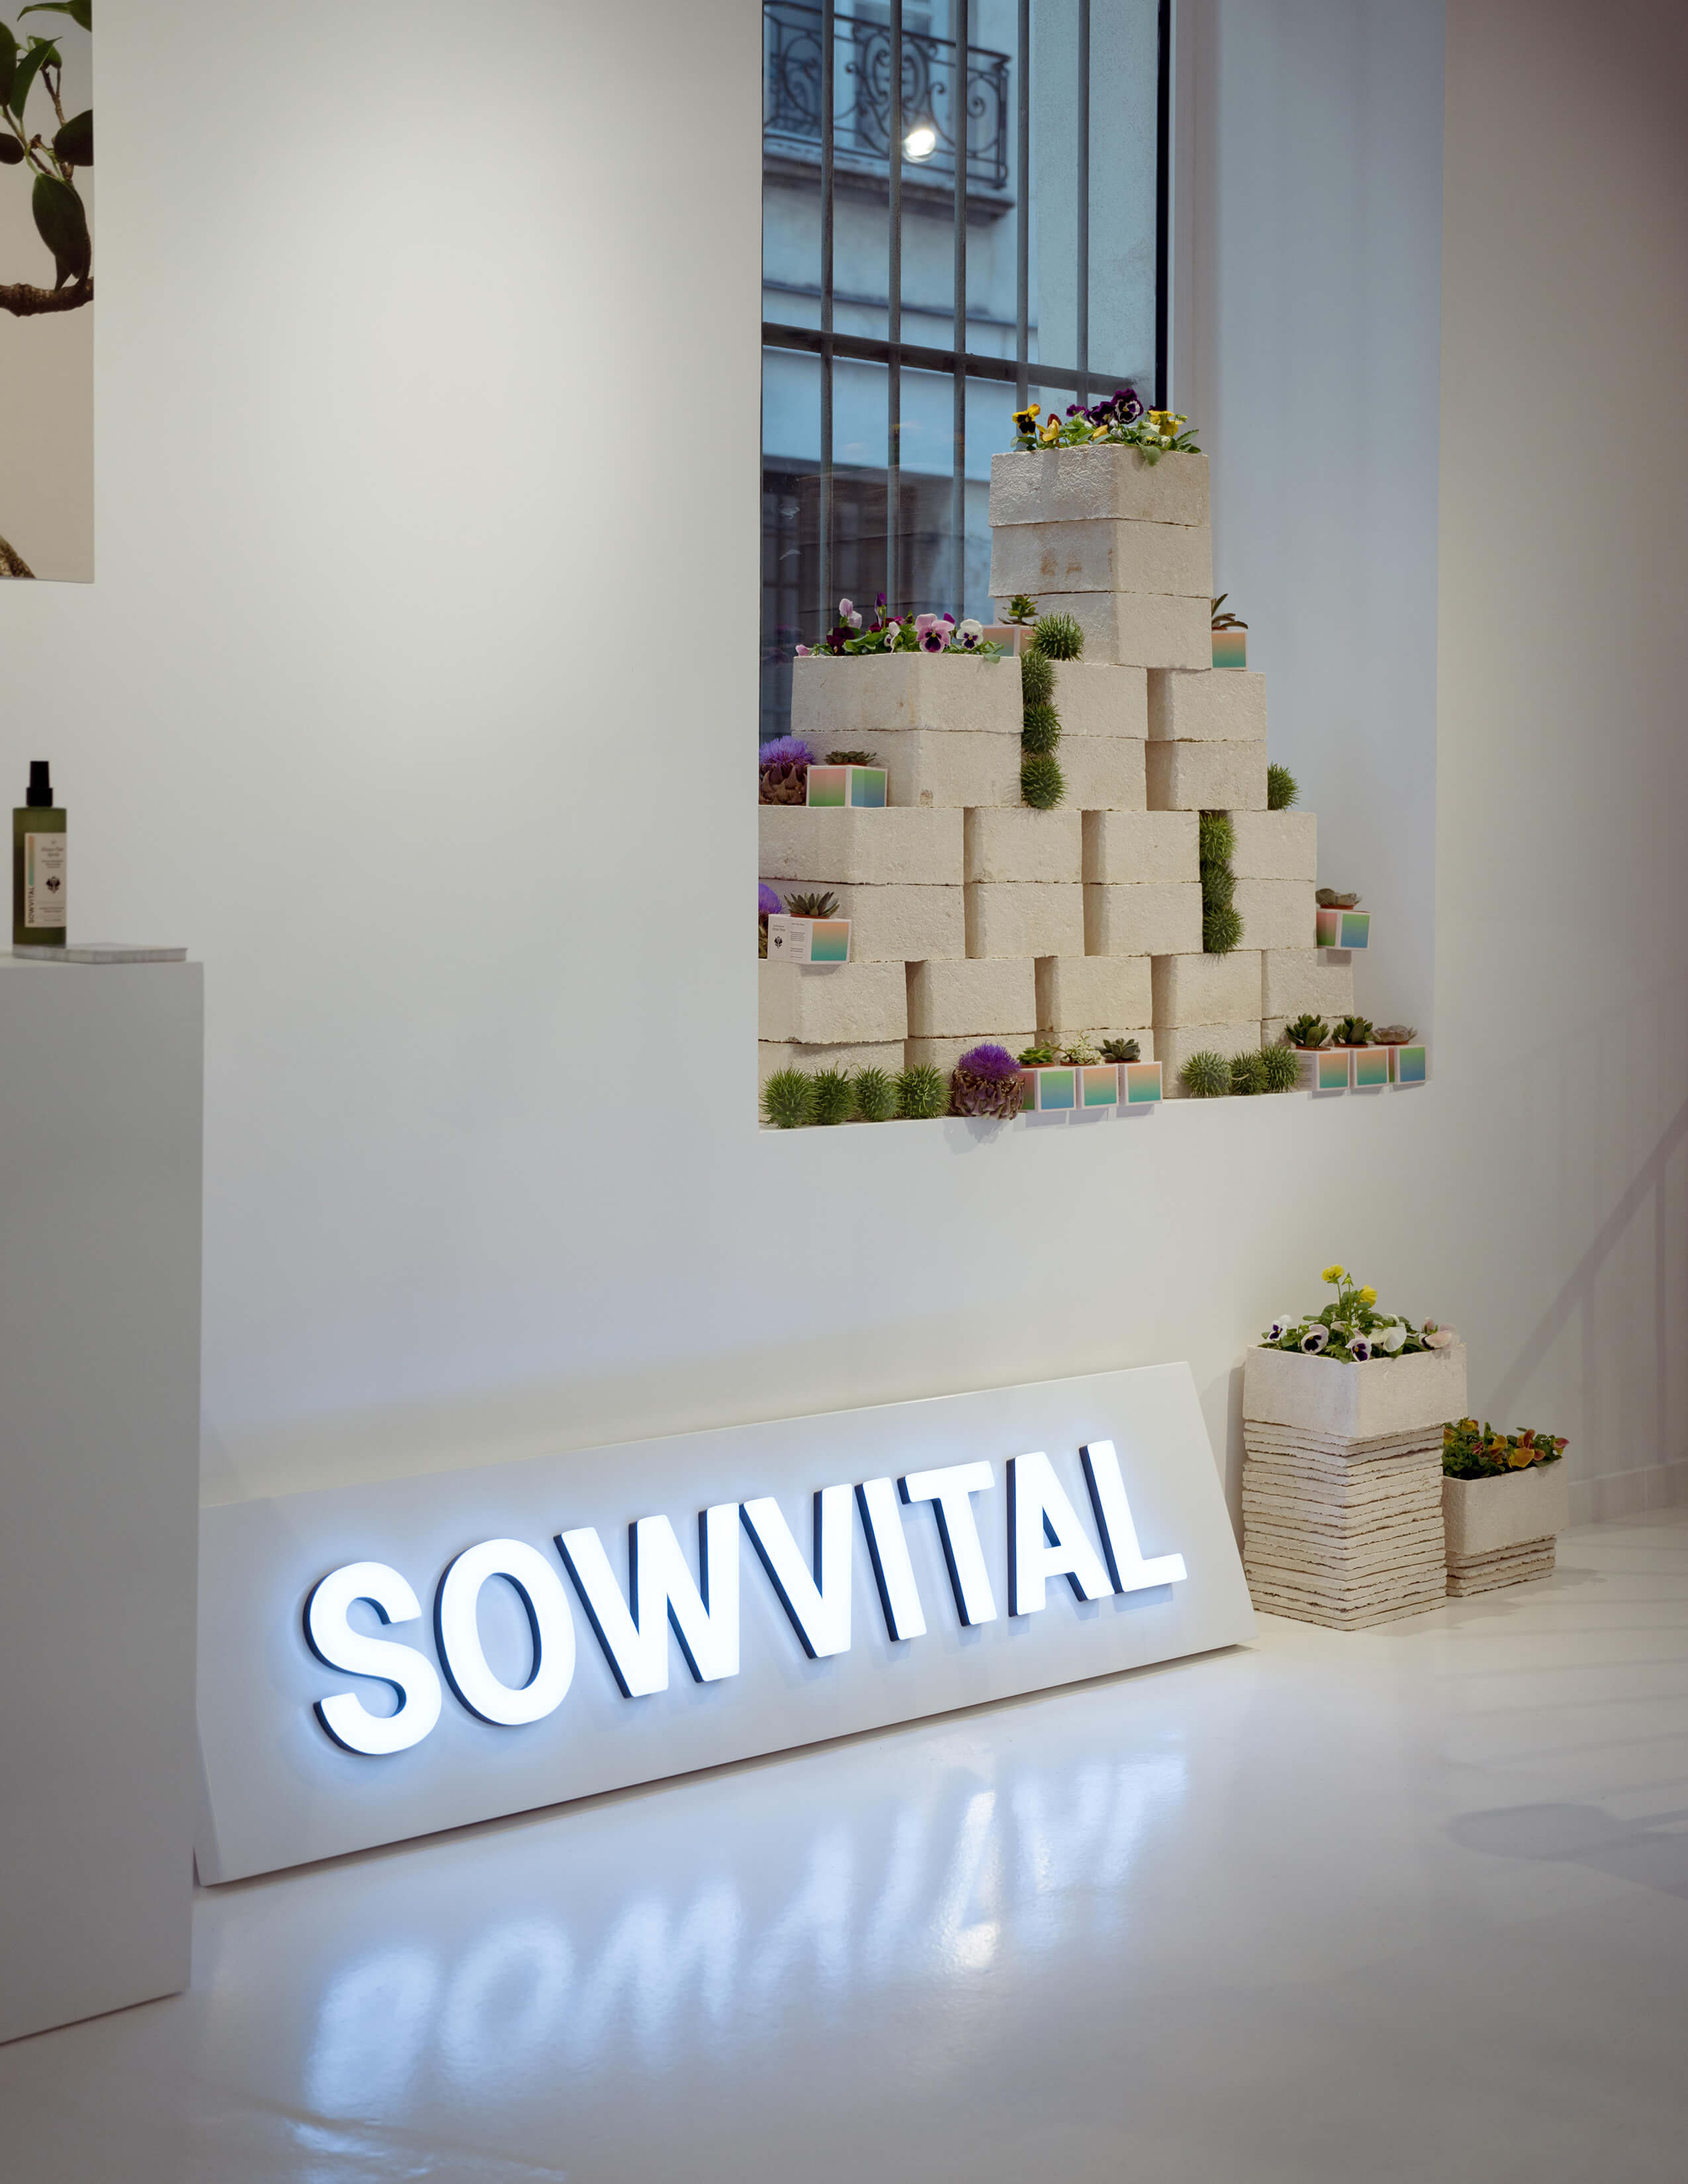 Sowvtital brand with neon lights on the floor while there are white boxes filled with different kinds of plants and flowers.